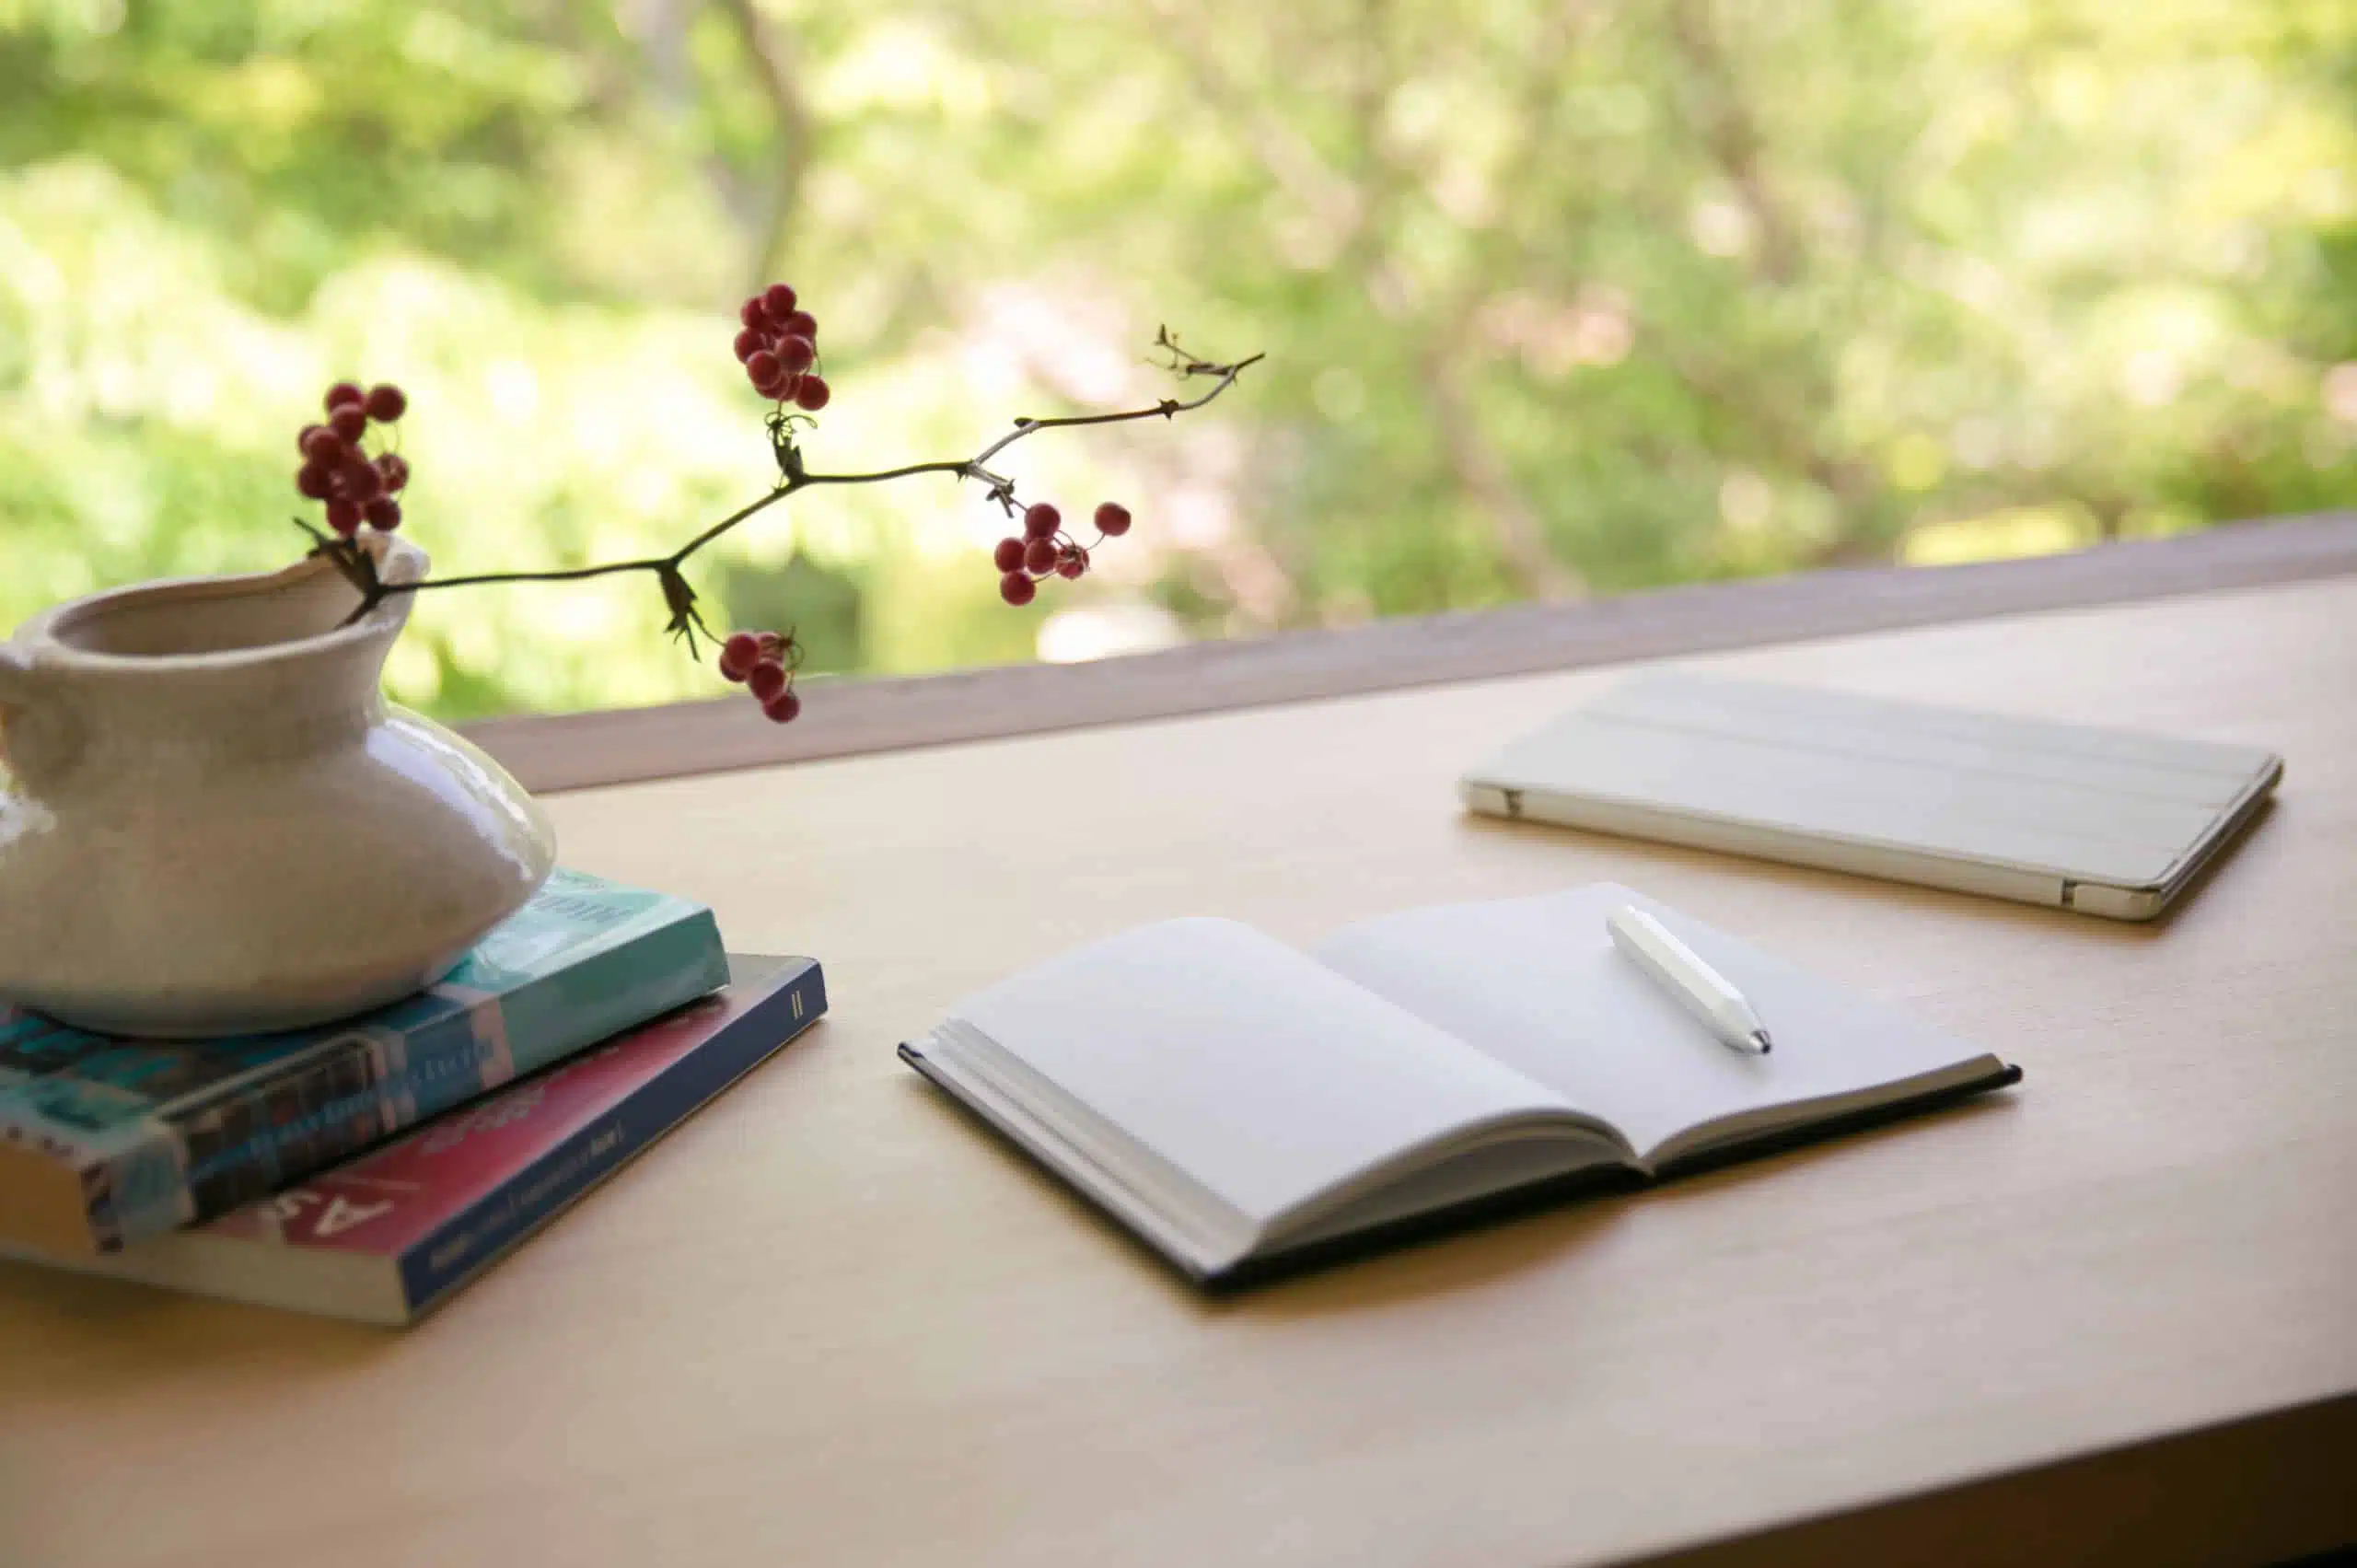 Notebook, pen, and books by the window.